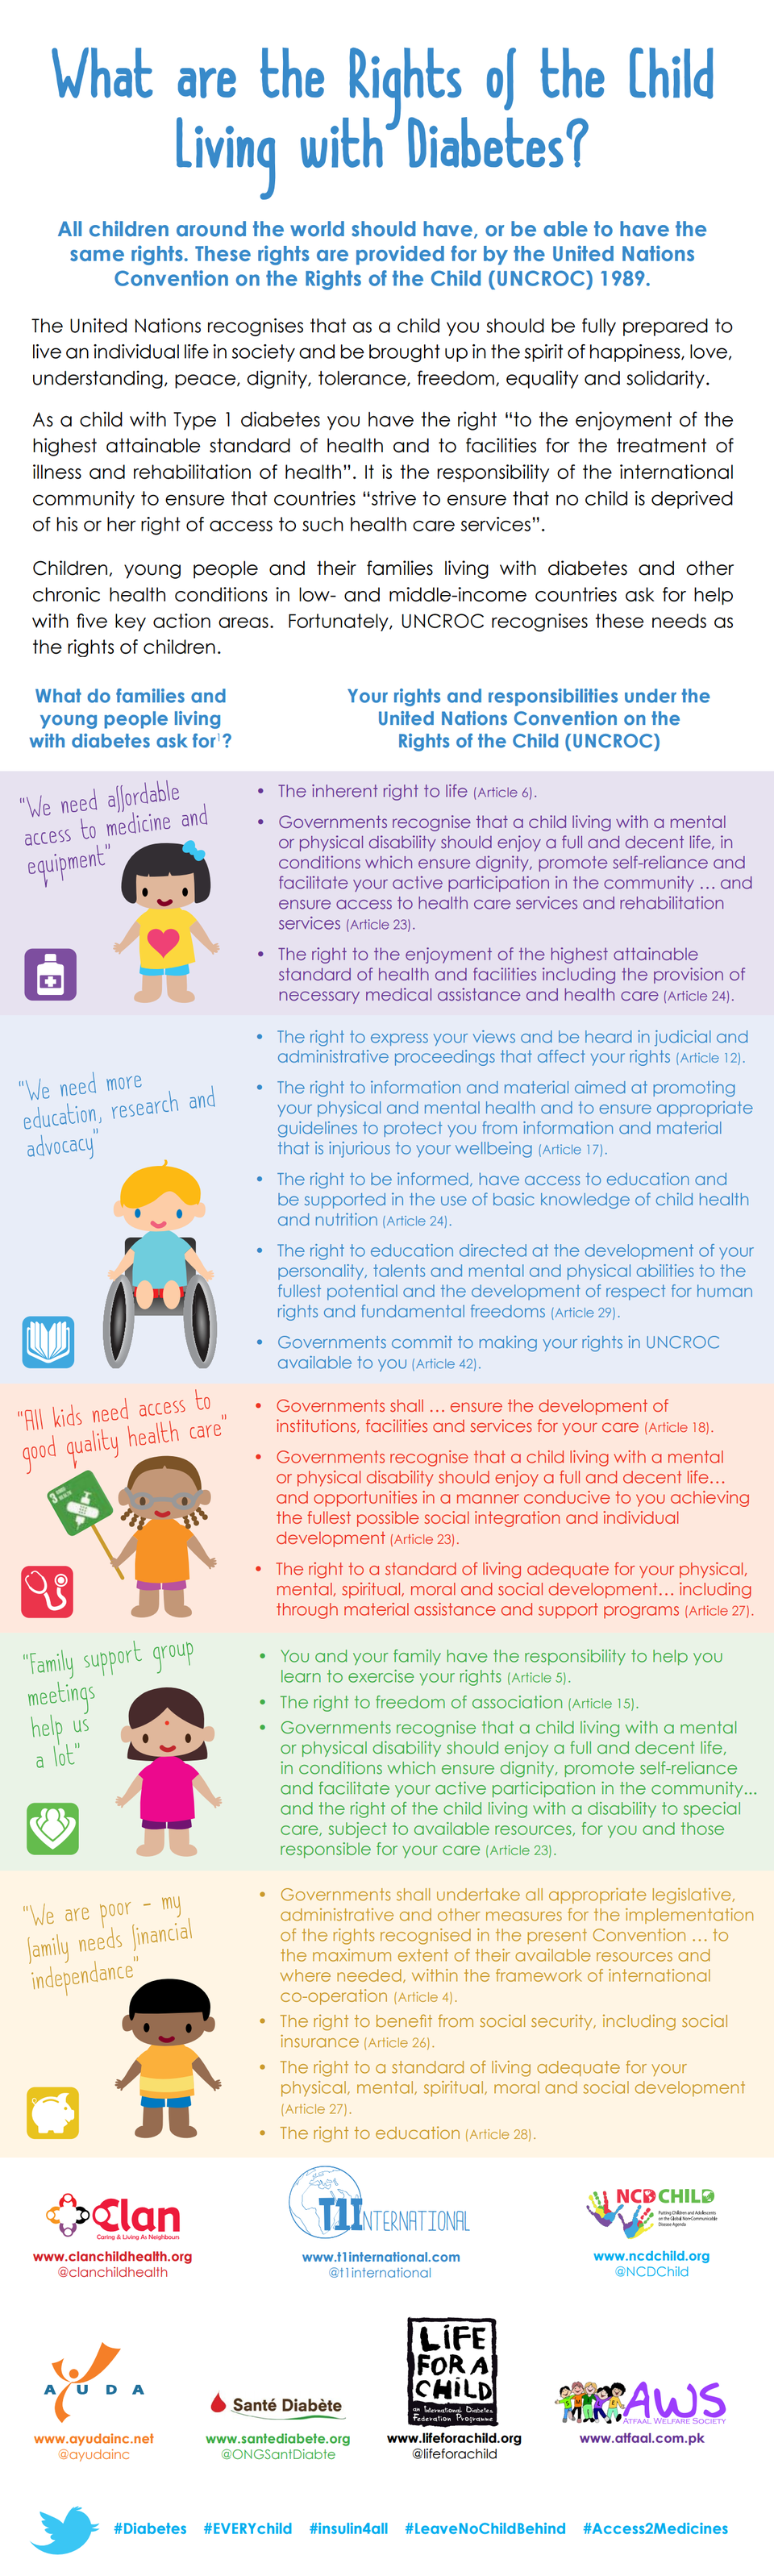 This is a screenshot snippet of the Rights of the Child with Type 1 Diabetes PDF document